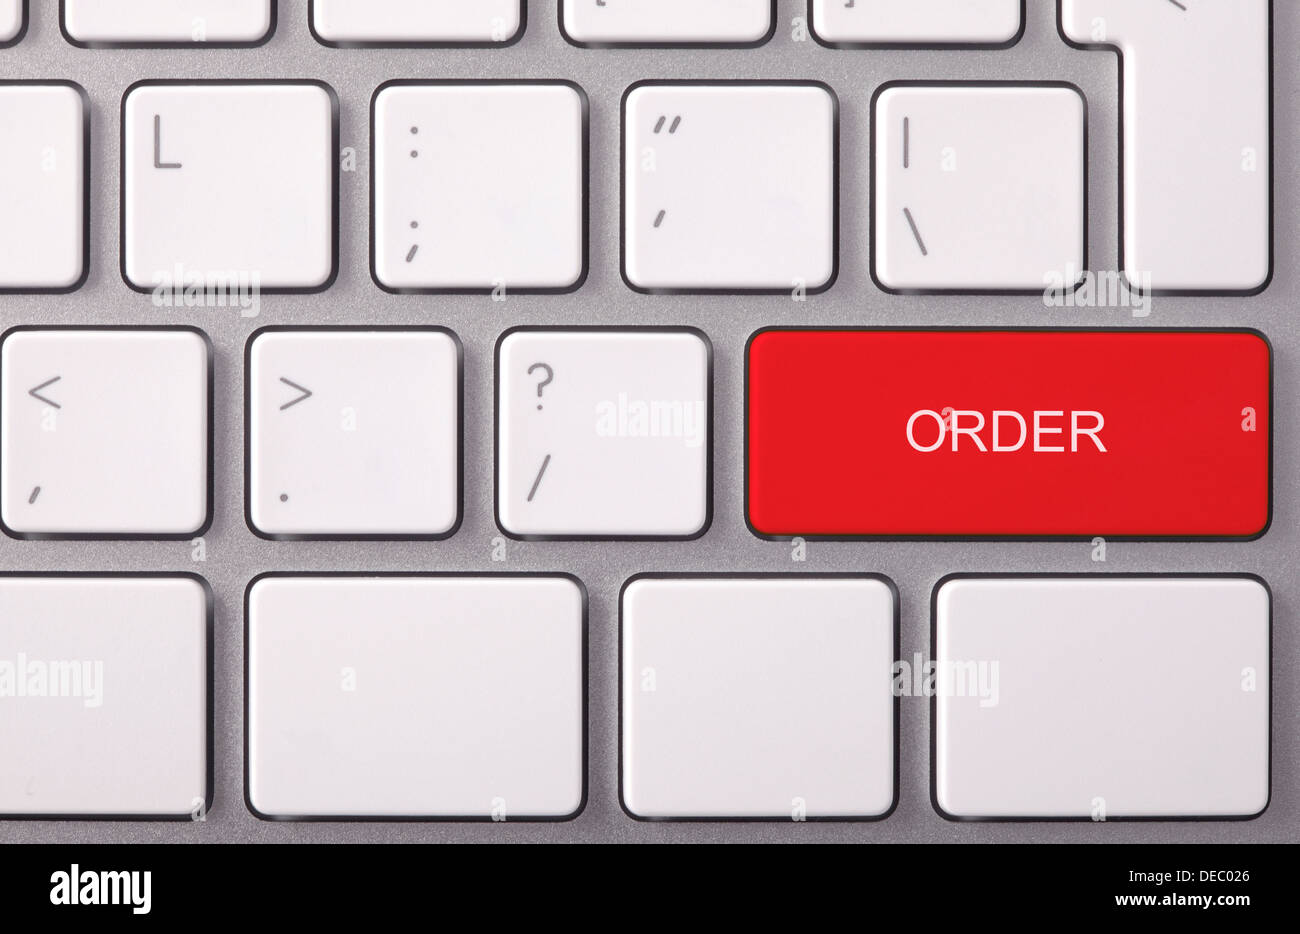 Laptop keyboard and red key 'ORDER' on it Stock Photo